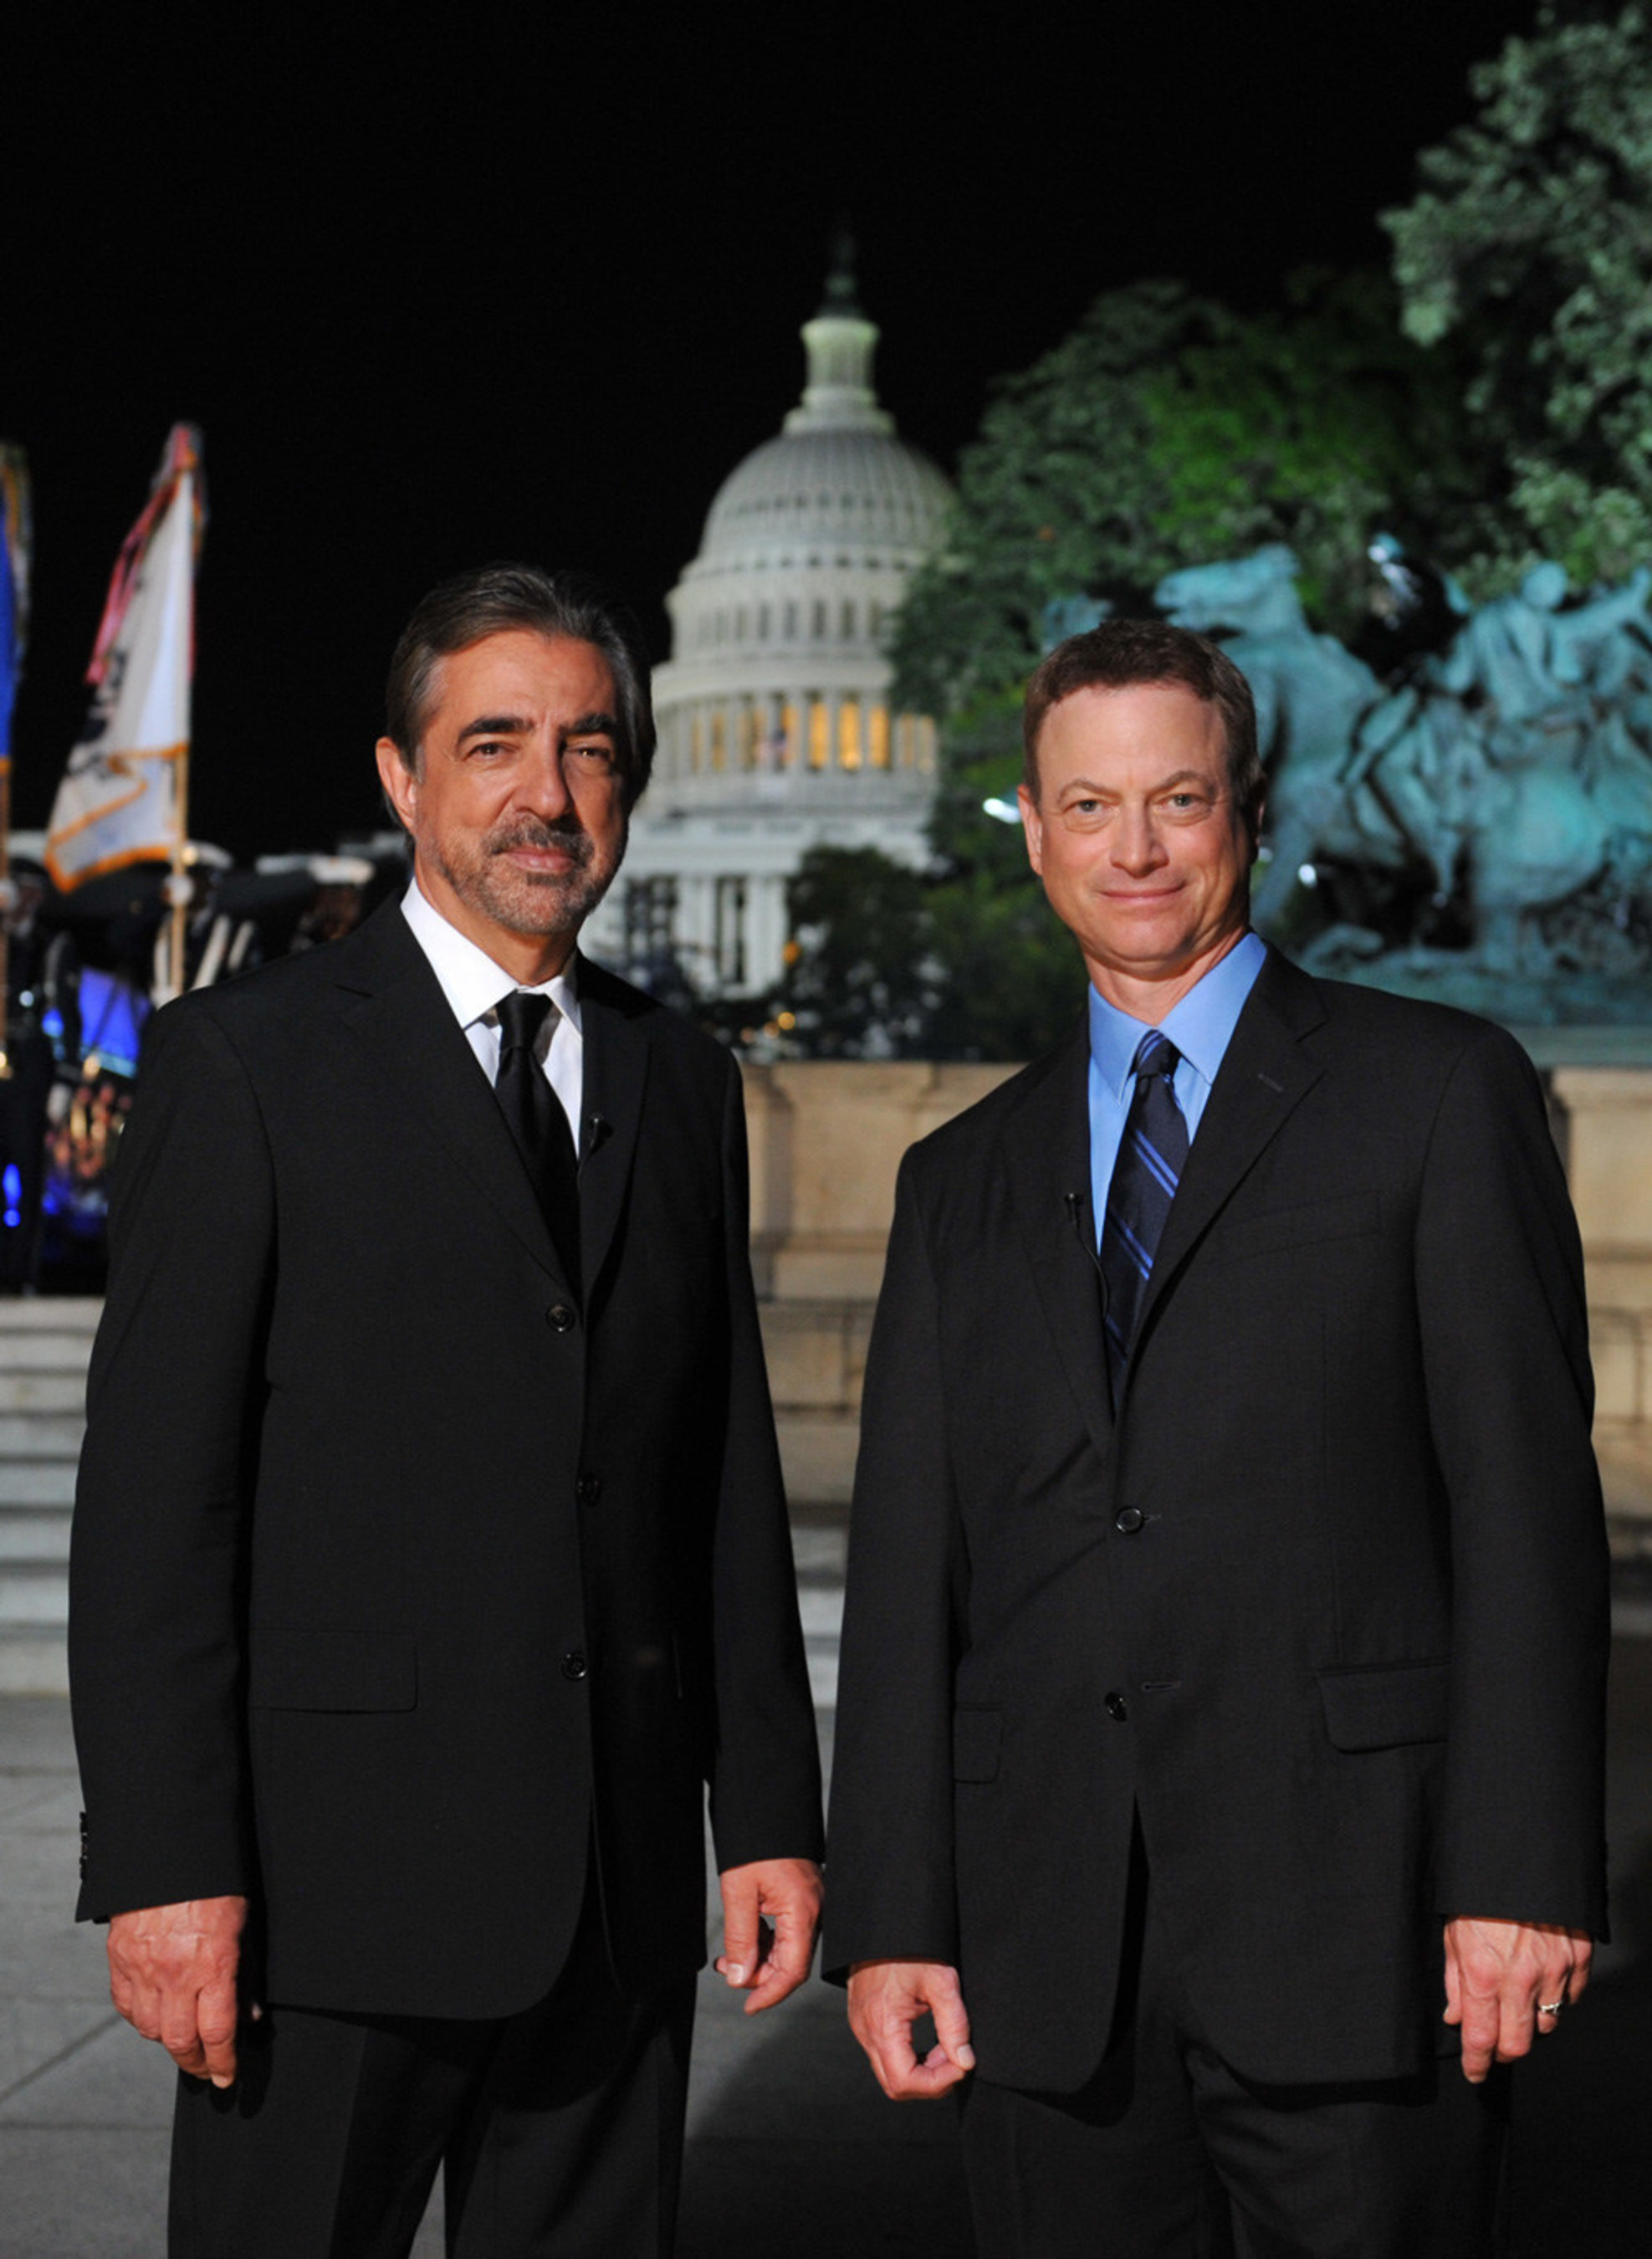 Tony Award-winner Joe Mantegna and Emmy Award-winner Gary Sinise co-host theNATIONAL MEMORIAL DAY CONCERT returning live from the West Lawn of the U.S.Capitol on Sunday, May 24, 2015 from 8:00 to 9:30 p.m. ET.  The broadcastmarks the tenth anniversary that the acclaimed actors, who dedicatedthemselves to veterans' causes and supporting our troops in active service,co-host the event.